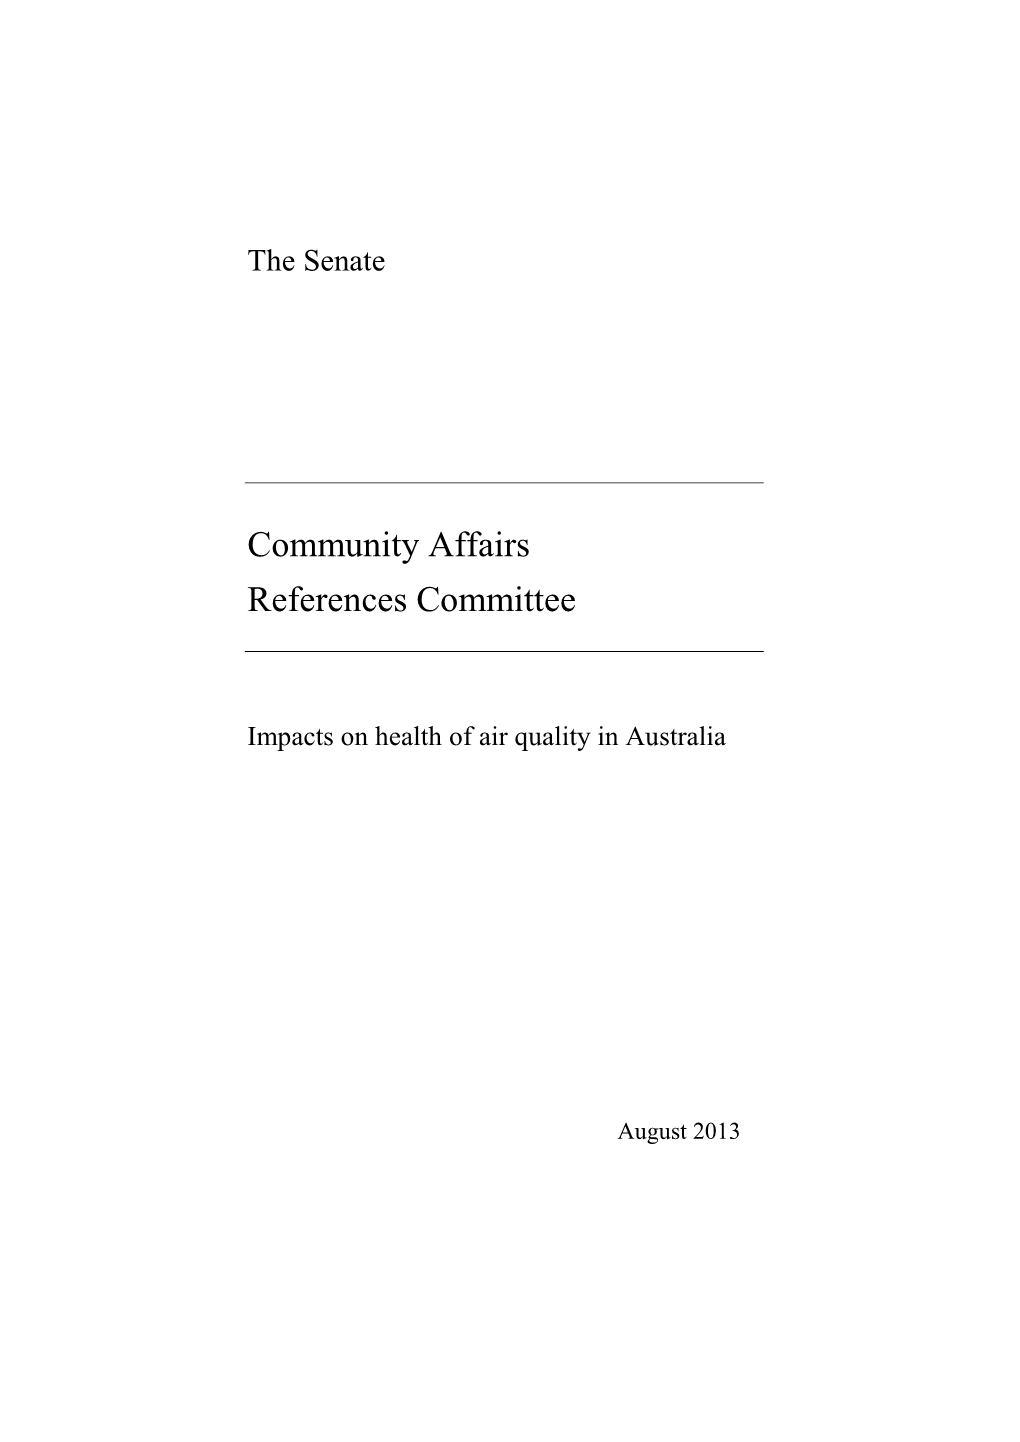 Report: Impacts on Health of Air Quality in Australia